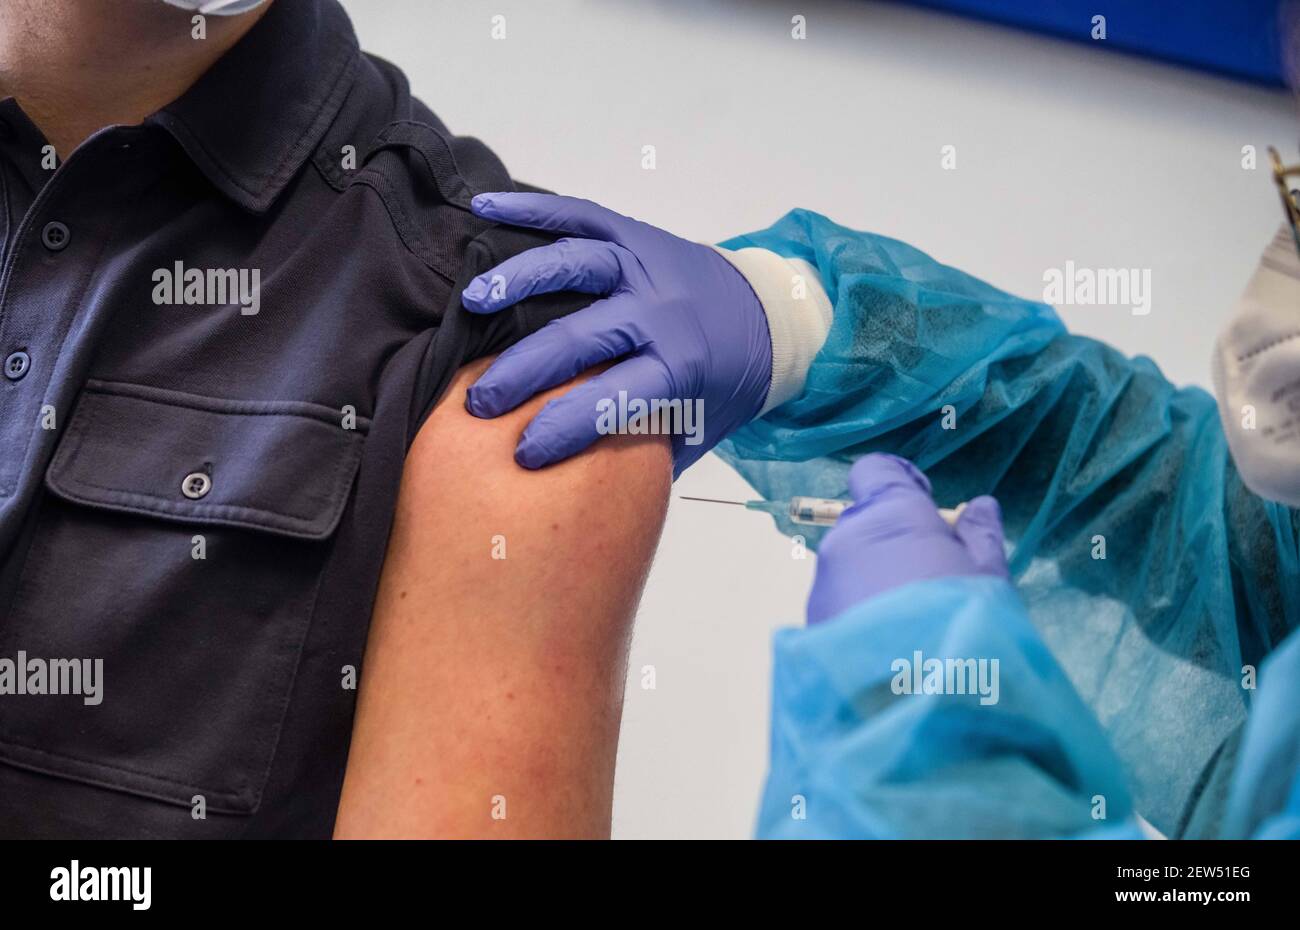 Munich, Bavaria, Germany. 2nd Mar, 2021. The administration of the AstraZeneca Covid vaccine to Munich Police. Starting with some 10,000 doses of the AstraZeneca Covid-19 vaccine, the Bavarian Police has begun vaccinating its Bereitschaftspolizei and Einsatzeinheiten- specialized police units that deal with demonstrations, riots, and other missions. Germany's vaccine program has been criticized for being extremely slow, with numerous nations surpassing not only percentage of the population vaccinated, but also absolute numbers as they vaccinate those at risk and simultaneously the general Stock Photo